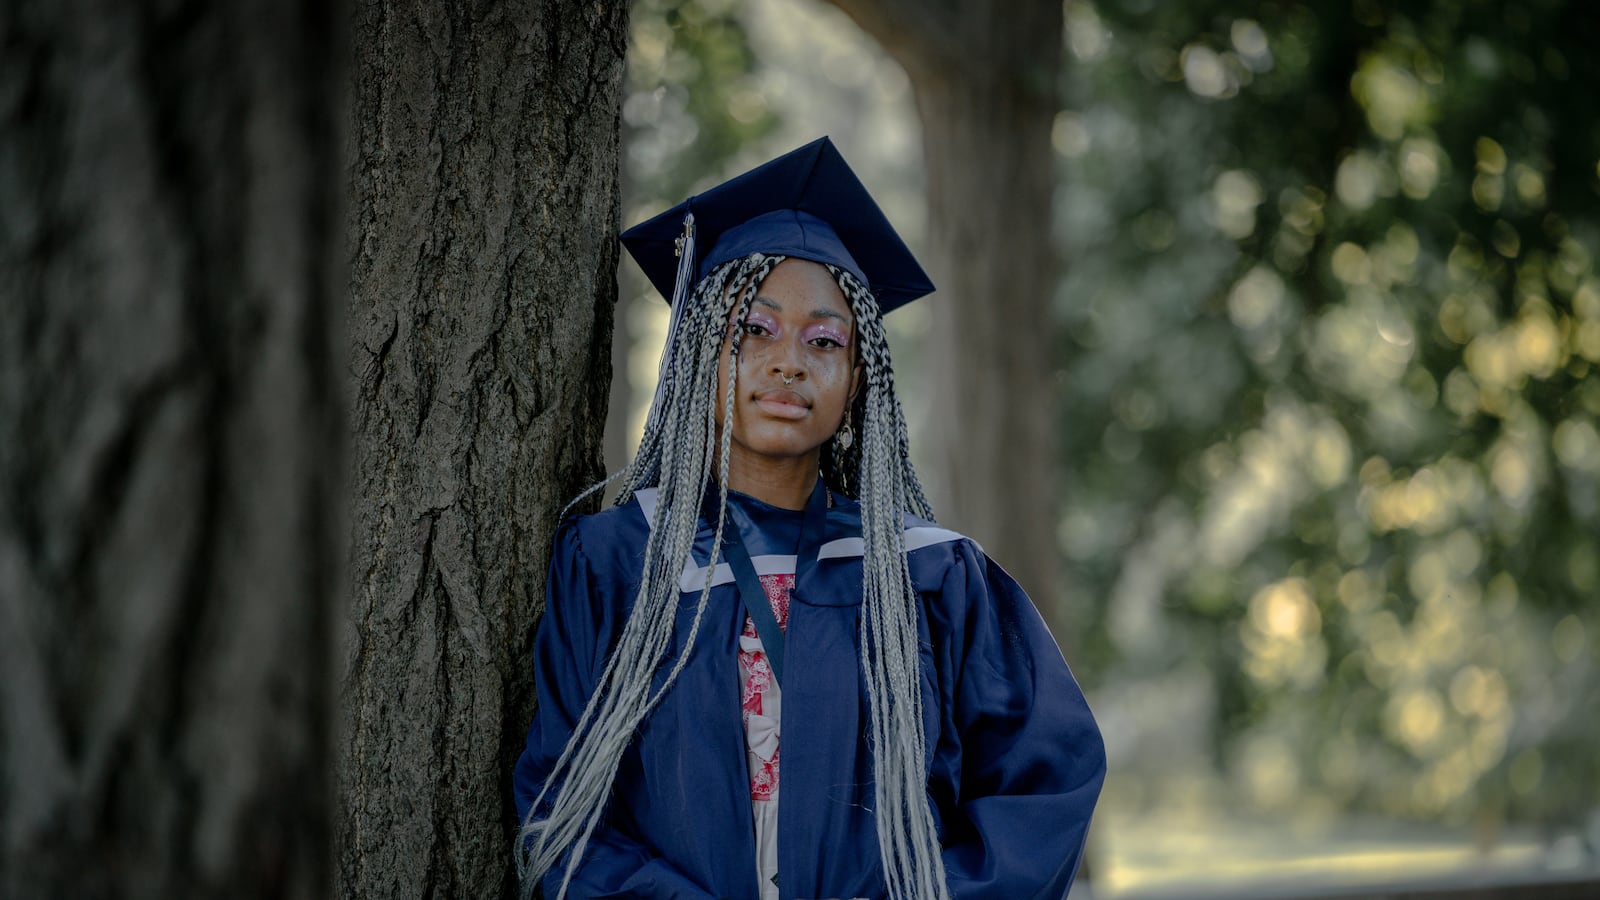 A young woman with long, braided hair poses for a portrait on her graduation day, wearing a blue cap and gown.